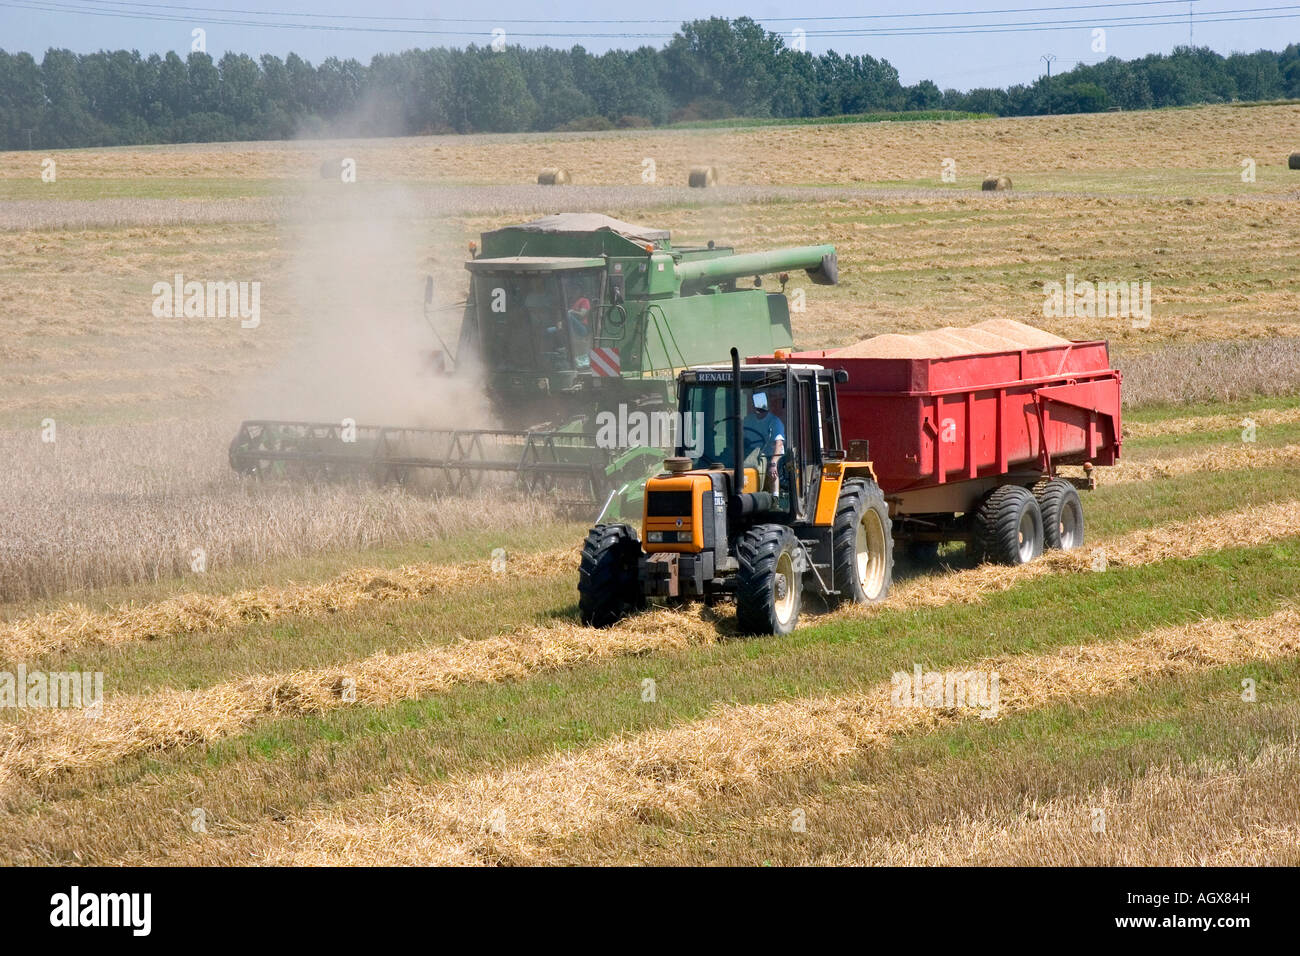 Wheat harvest near Vervins in the region of Picardie France Stock Photo